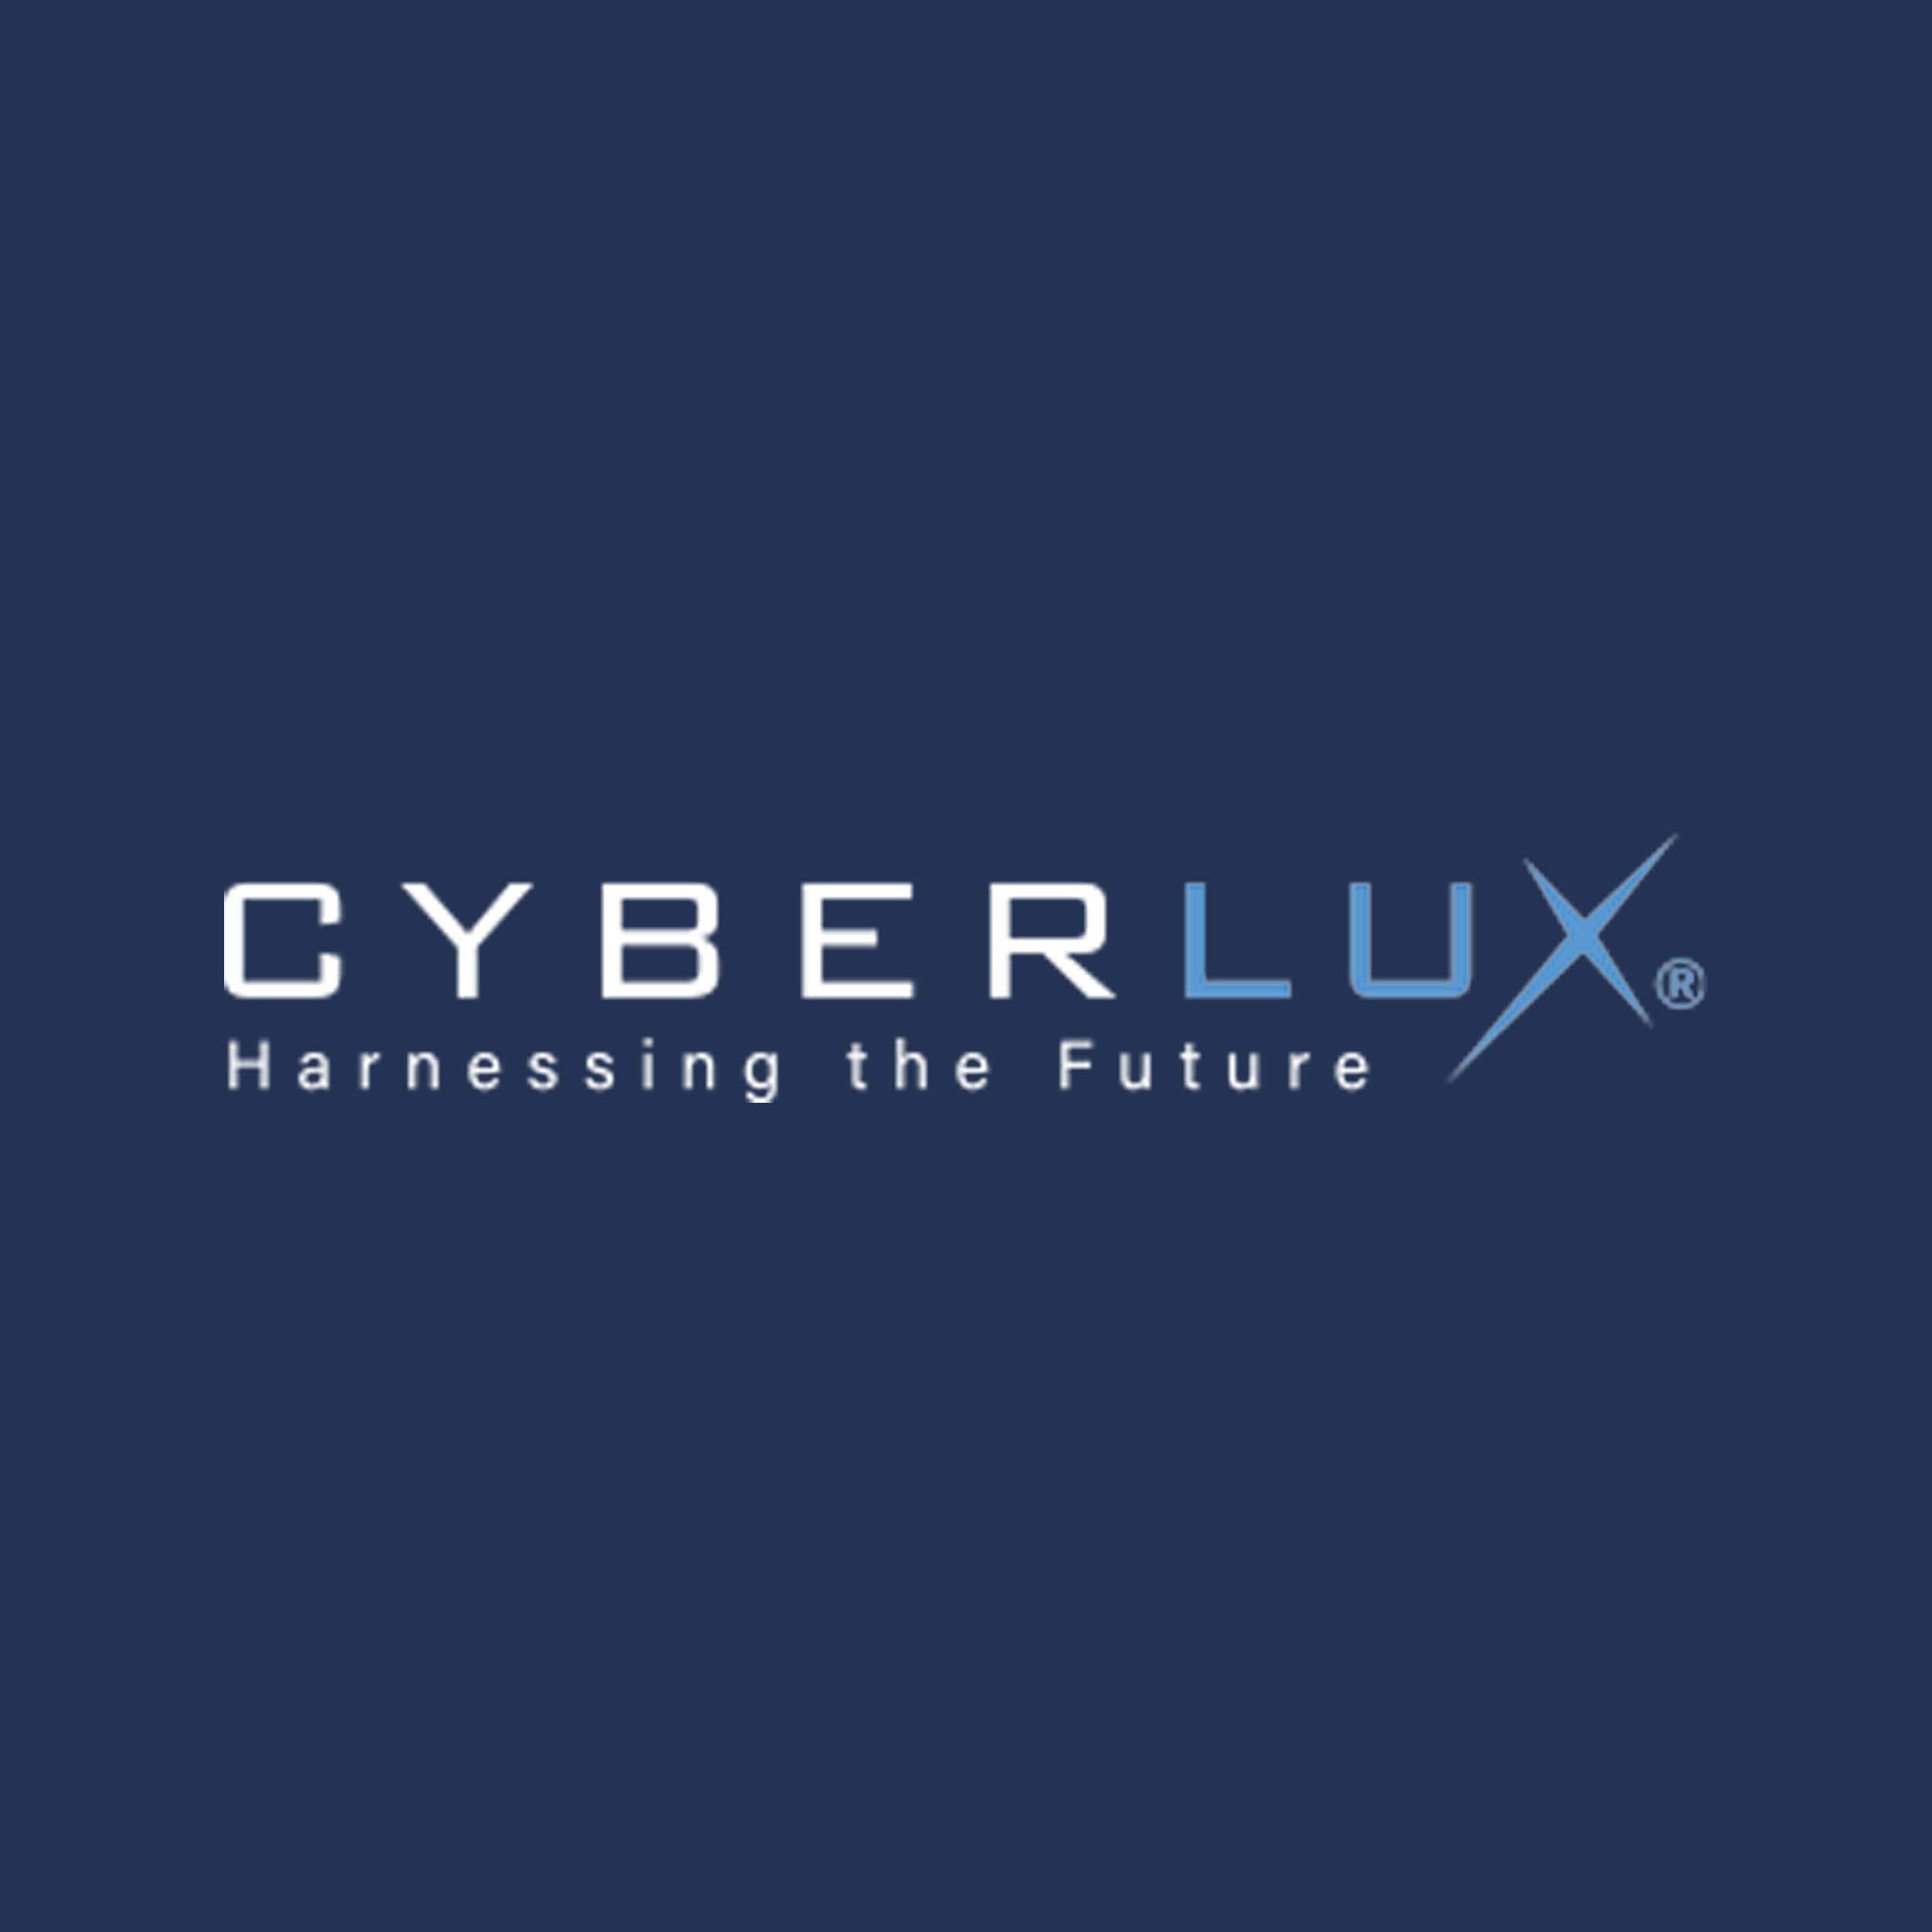 Cyberlux Corporation's Software Solutions Are A Revenues Game-Changer...Here's Why Its $44.5 Million 2022 Guidance May Be Conservative ($CYBL)